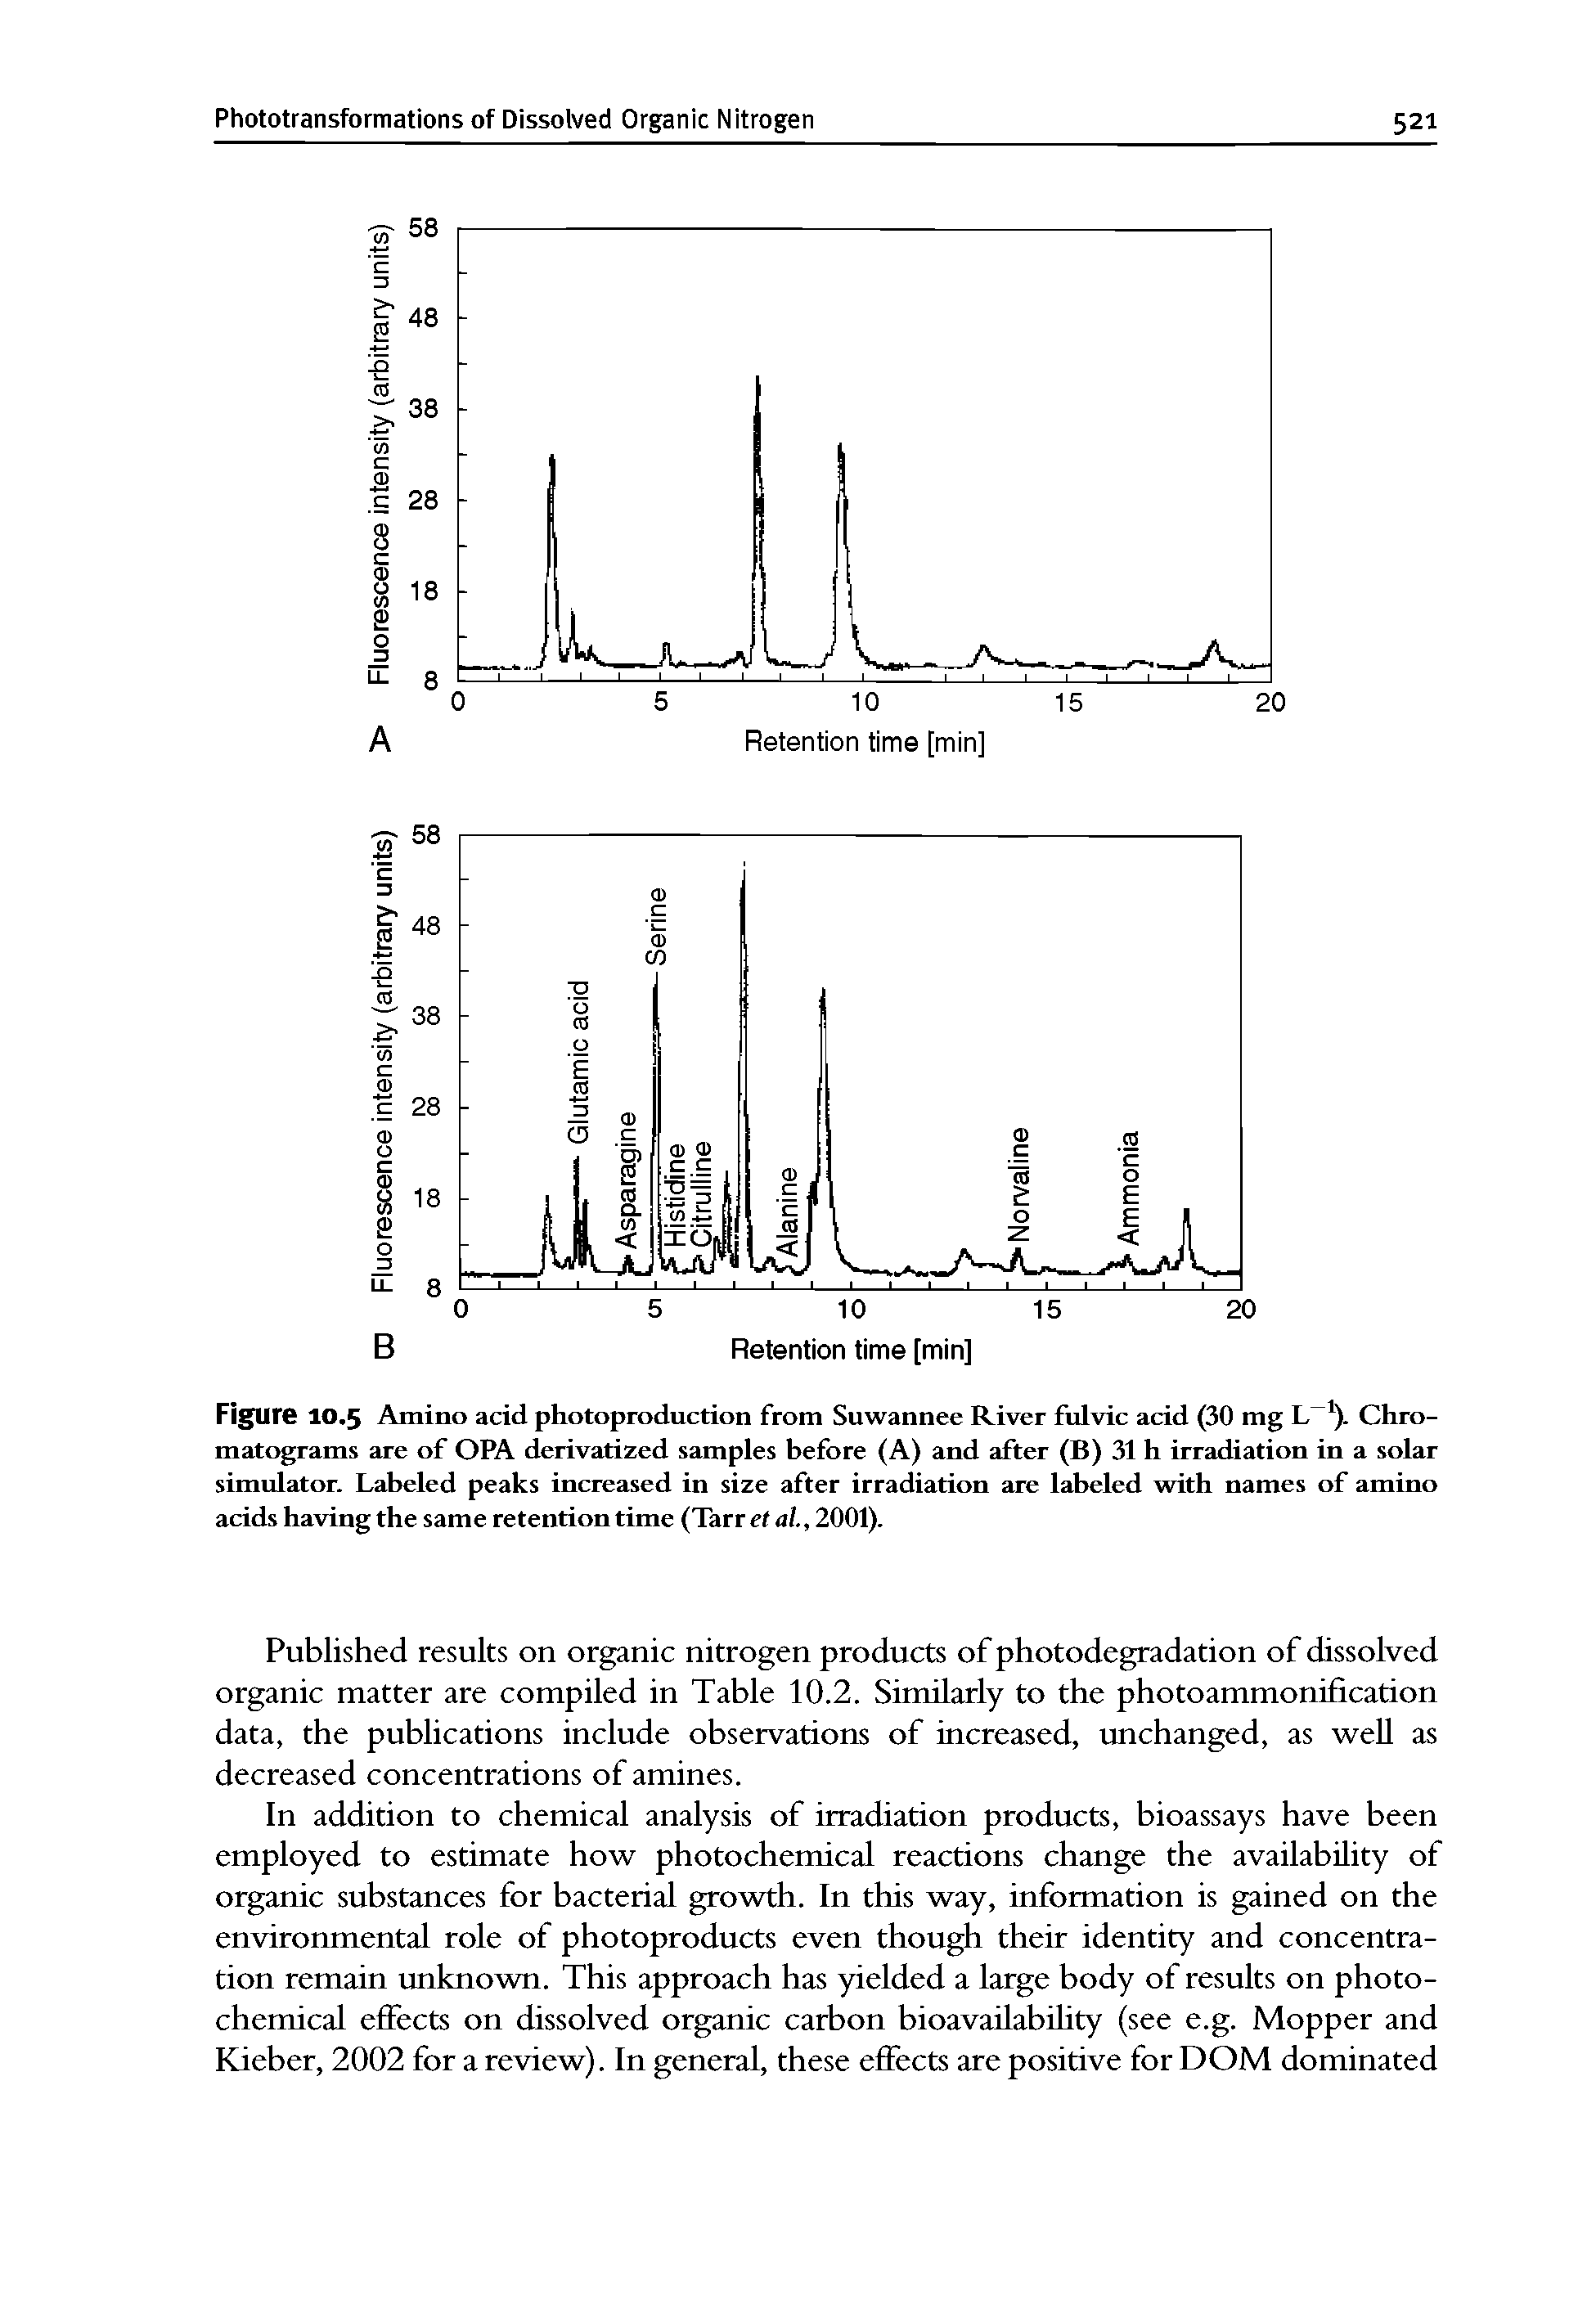 Figure 10.5 Amino acid photoproduction from Suwannee River fulvic acid (30 mg L ). Chromatograms are of OPA derivatized samples before (A) and after (B) 31 h irradiation in a solar simulator. Labeled peaks increased in size after irradiation are labeled with names of amino acids having the same retention time (Tarr et al., 2001).